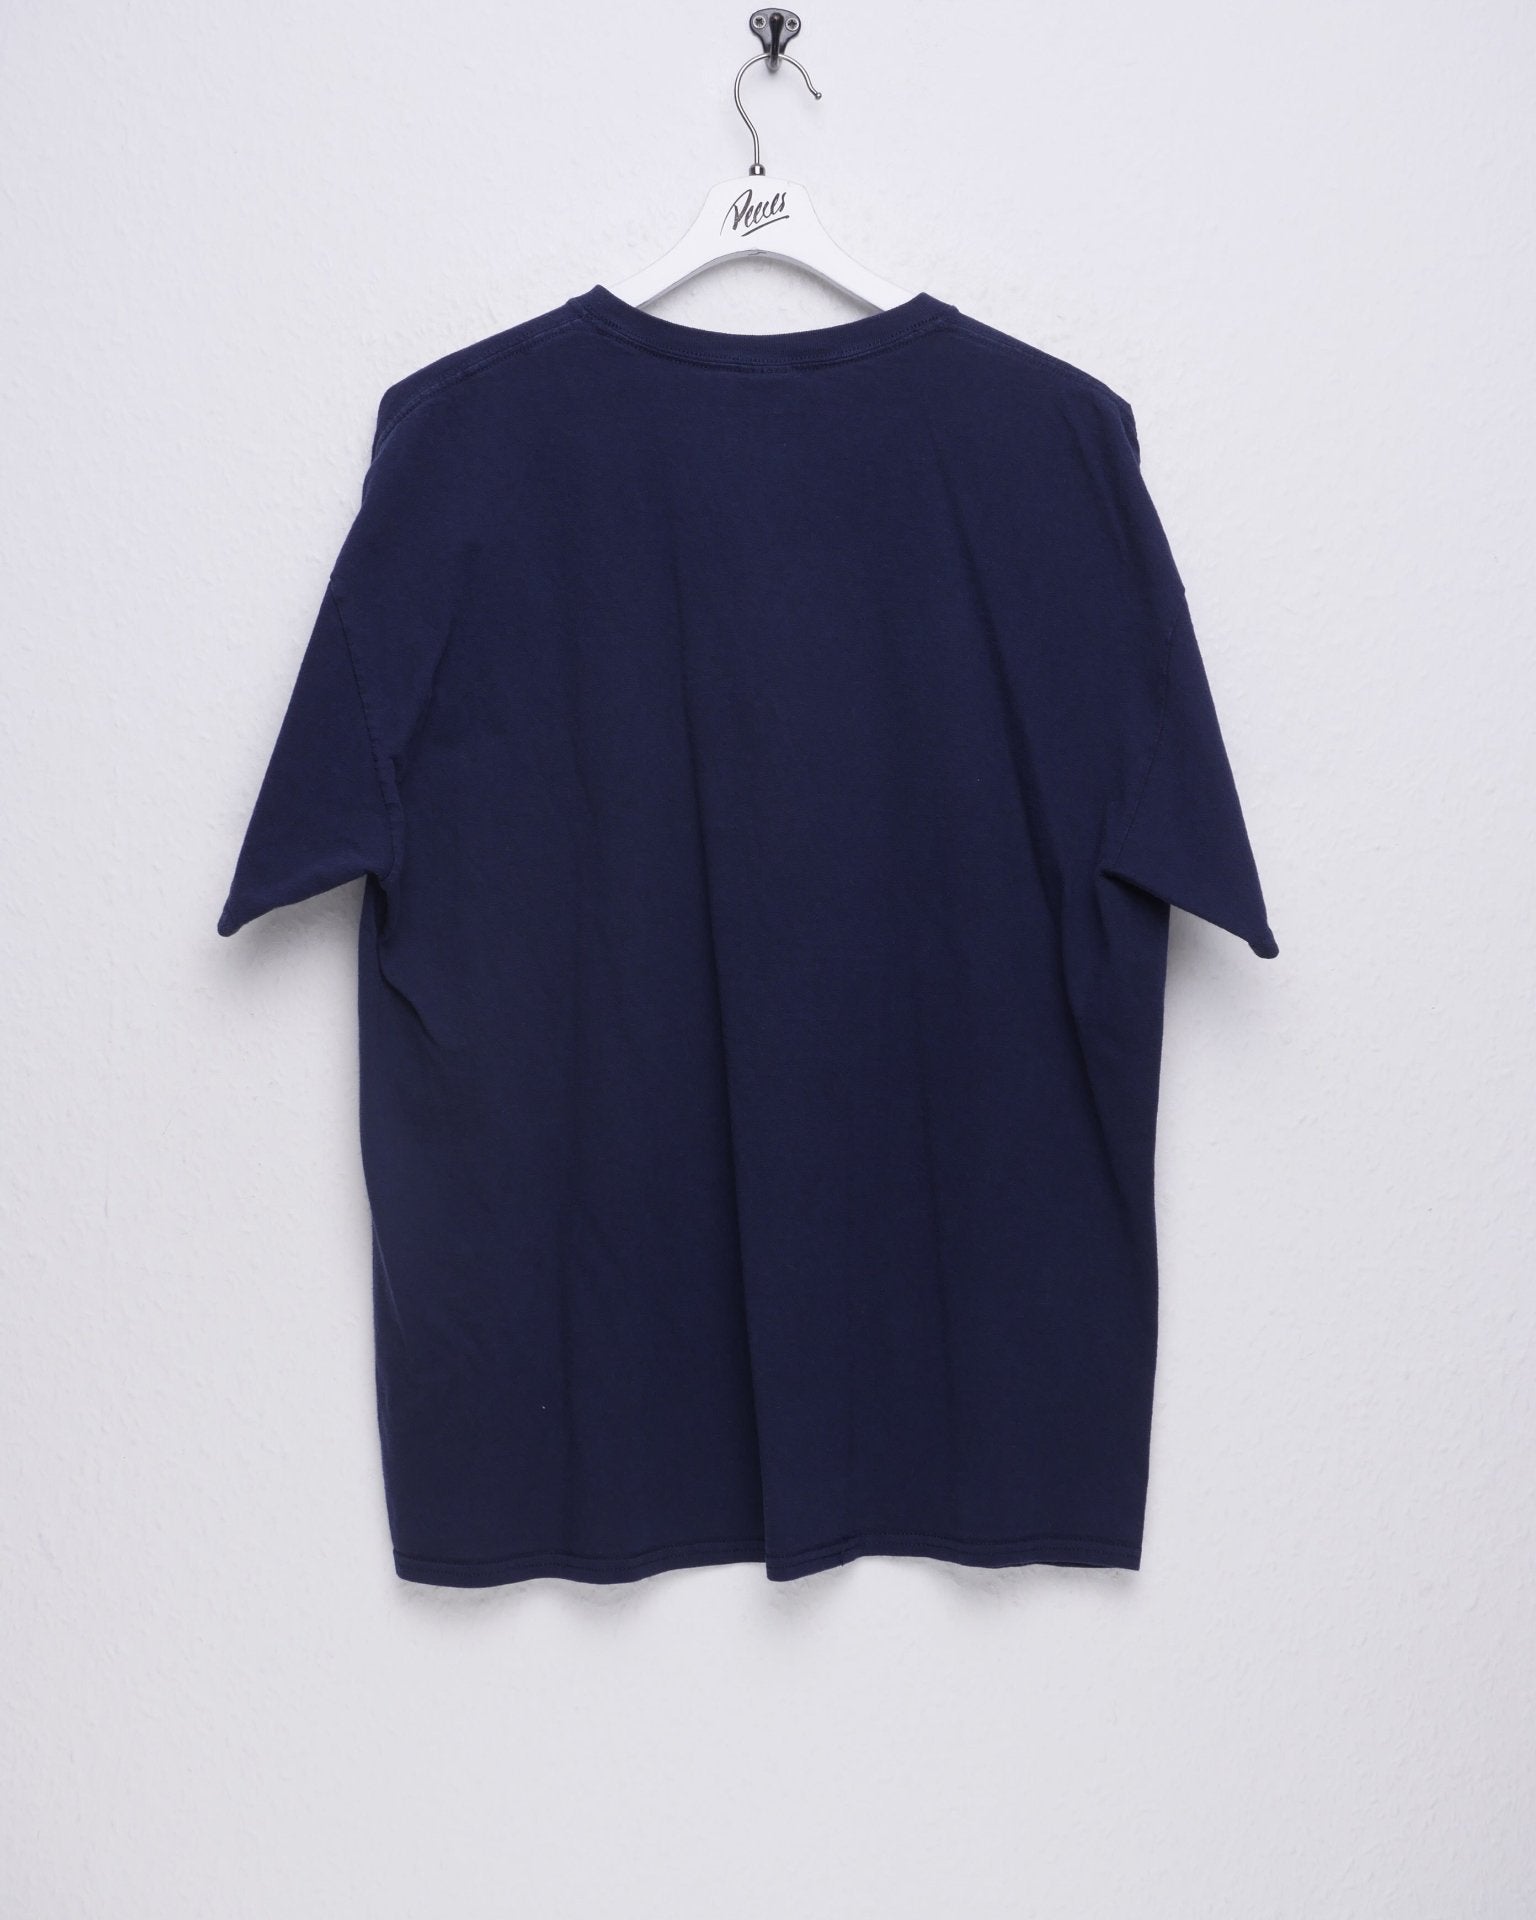 printed Spellout navy Shirt - Peeces